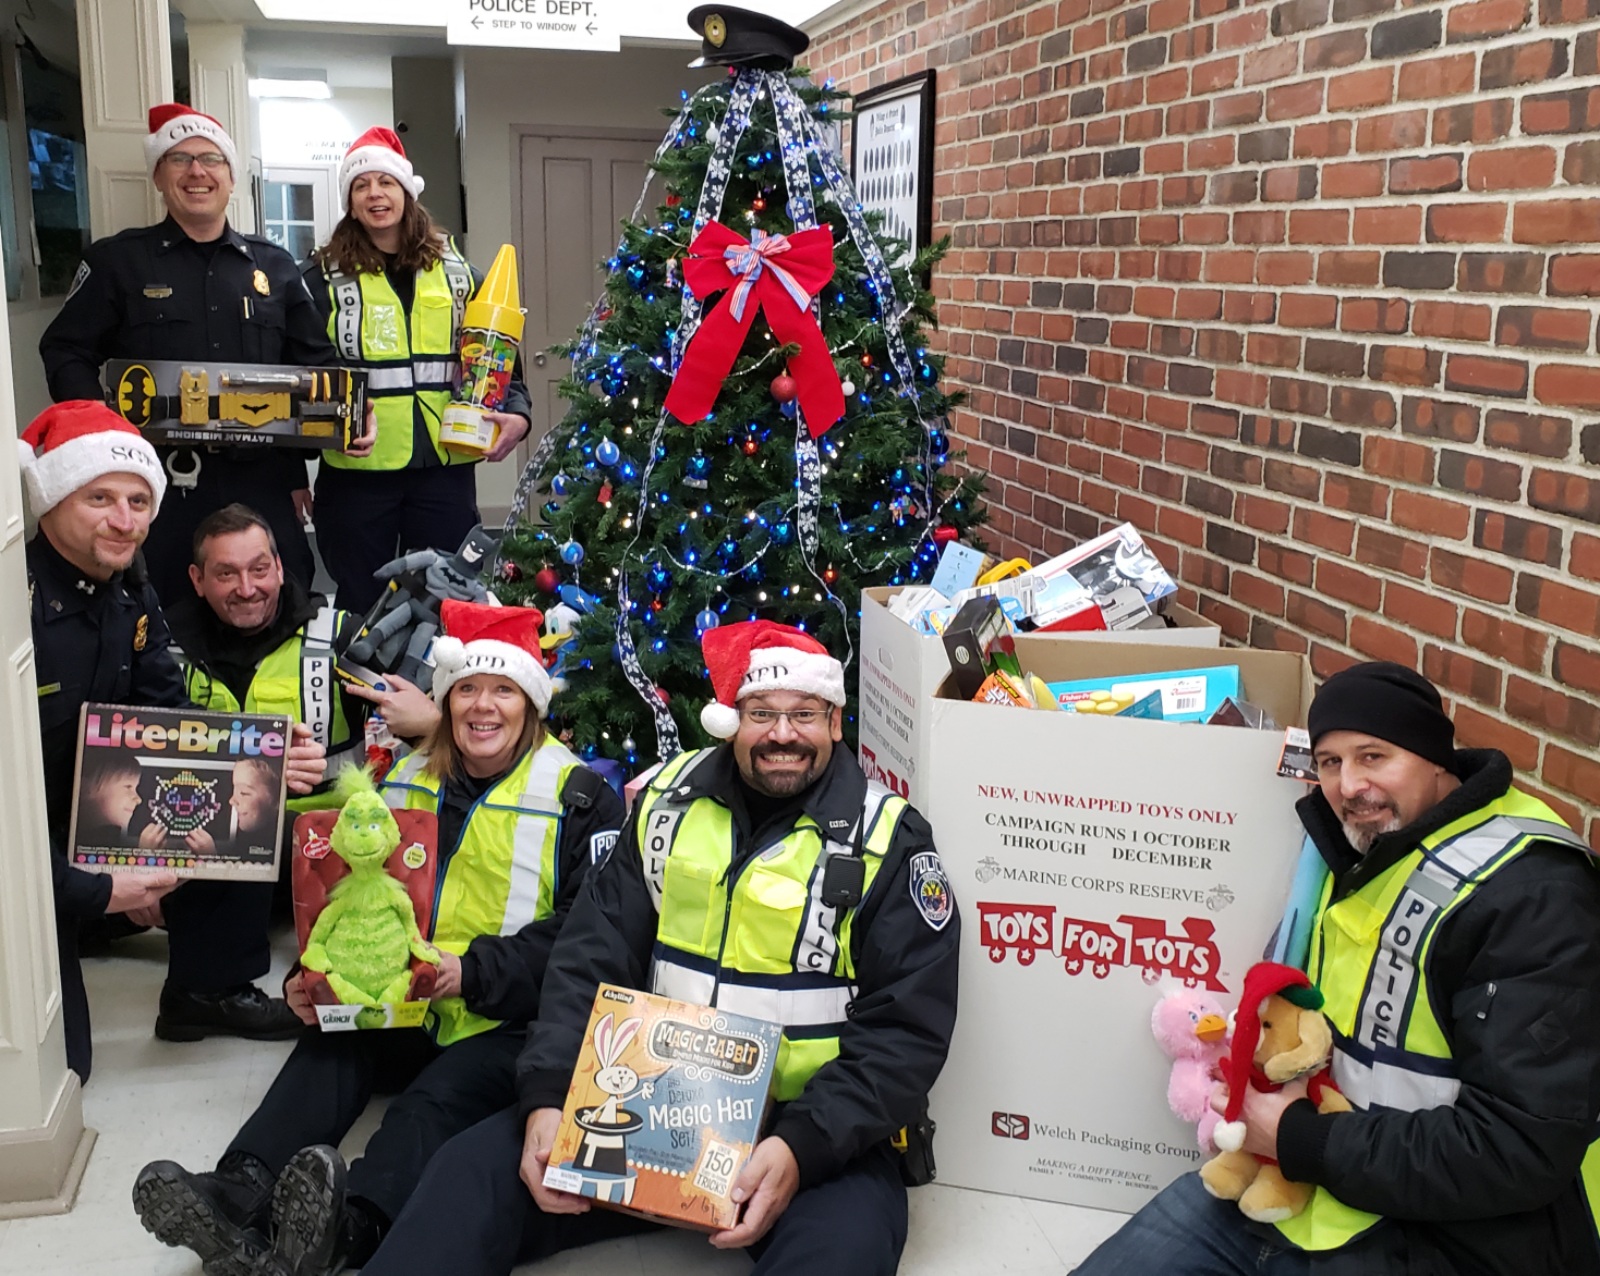 Oxford Village police officers show off some of the toys folks donated for kids in need. Photo provided.